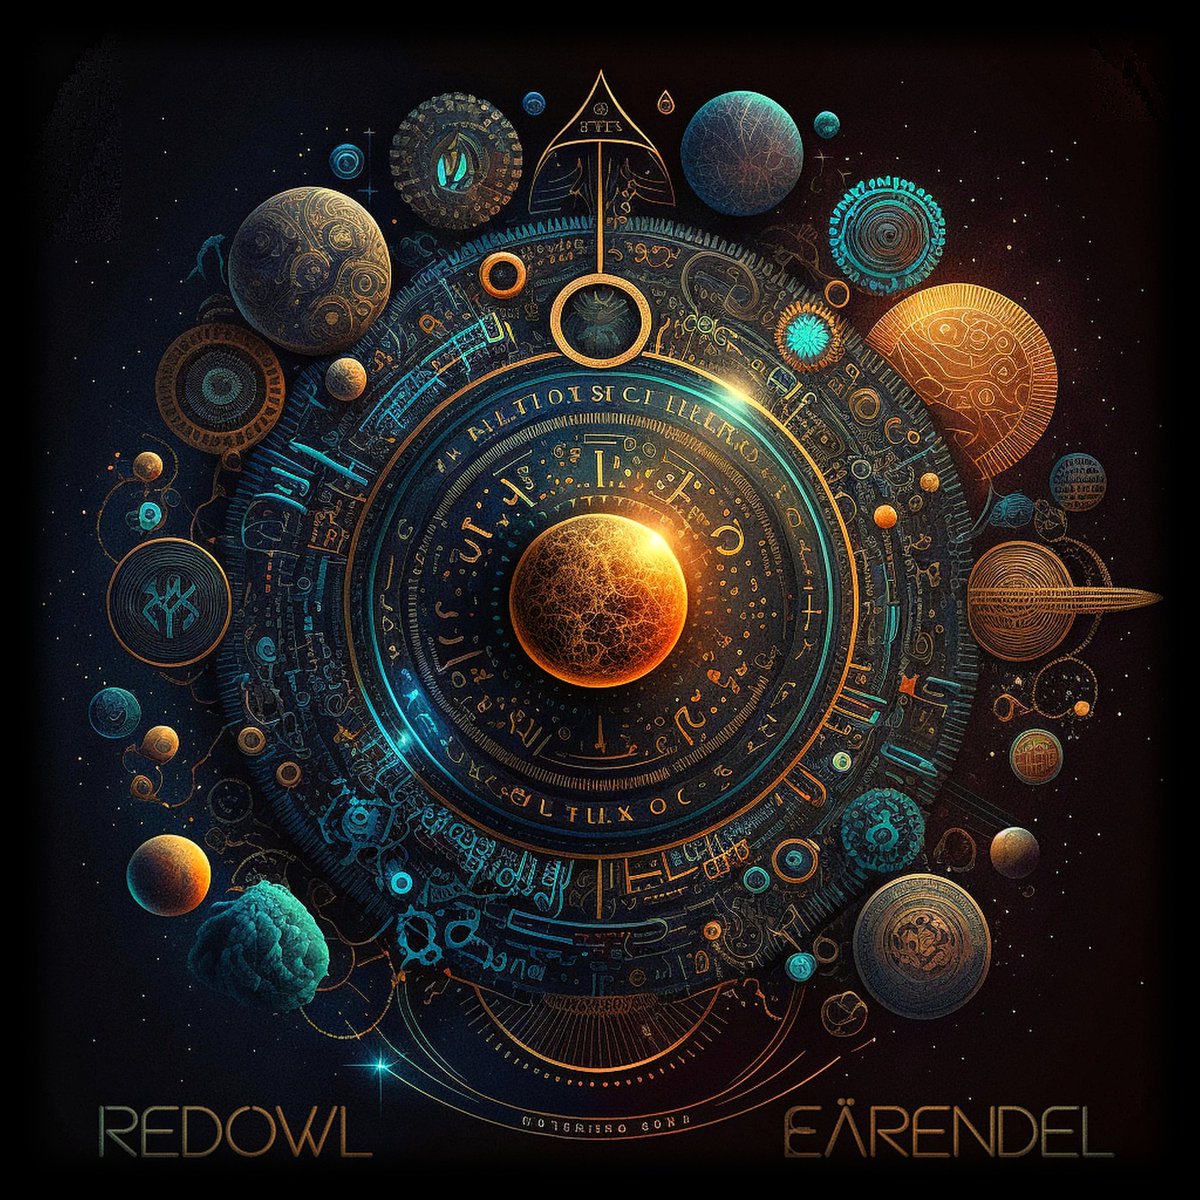 New track today!

Eärendel, by RedOwl
Thought provoking beats

@rtItBot @BlackettPromo @IRTYOURMUSIC @theretweetermag @sme_rt @ArtistRTweeters #LGTWO #EdmDutch @HosRecord @rtArtBoost

open.spotify.com/track/7beJXVSk…